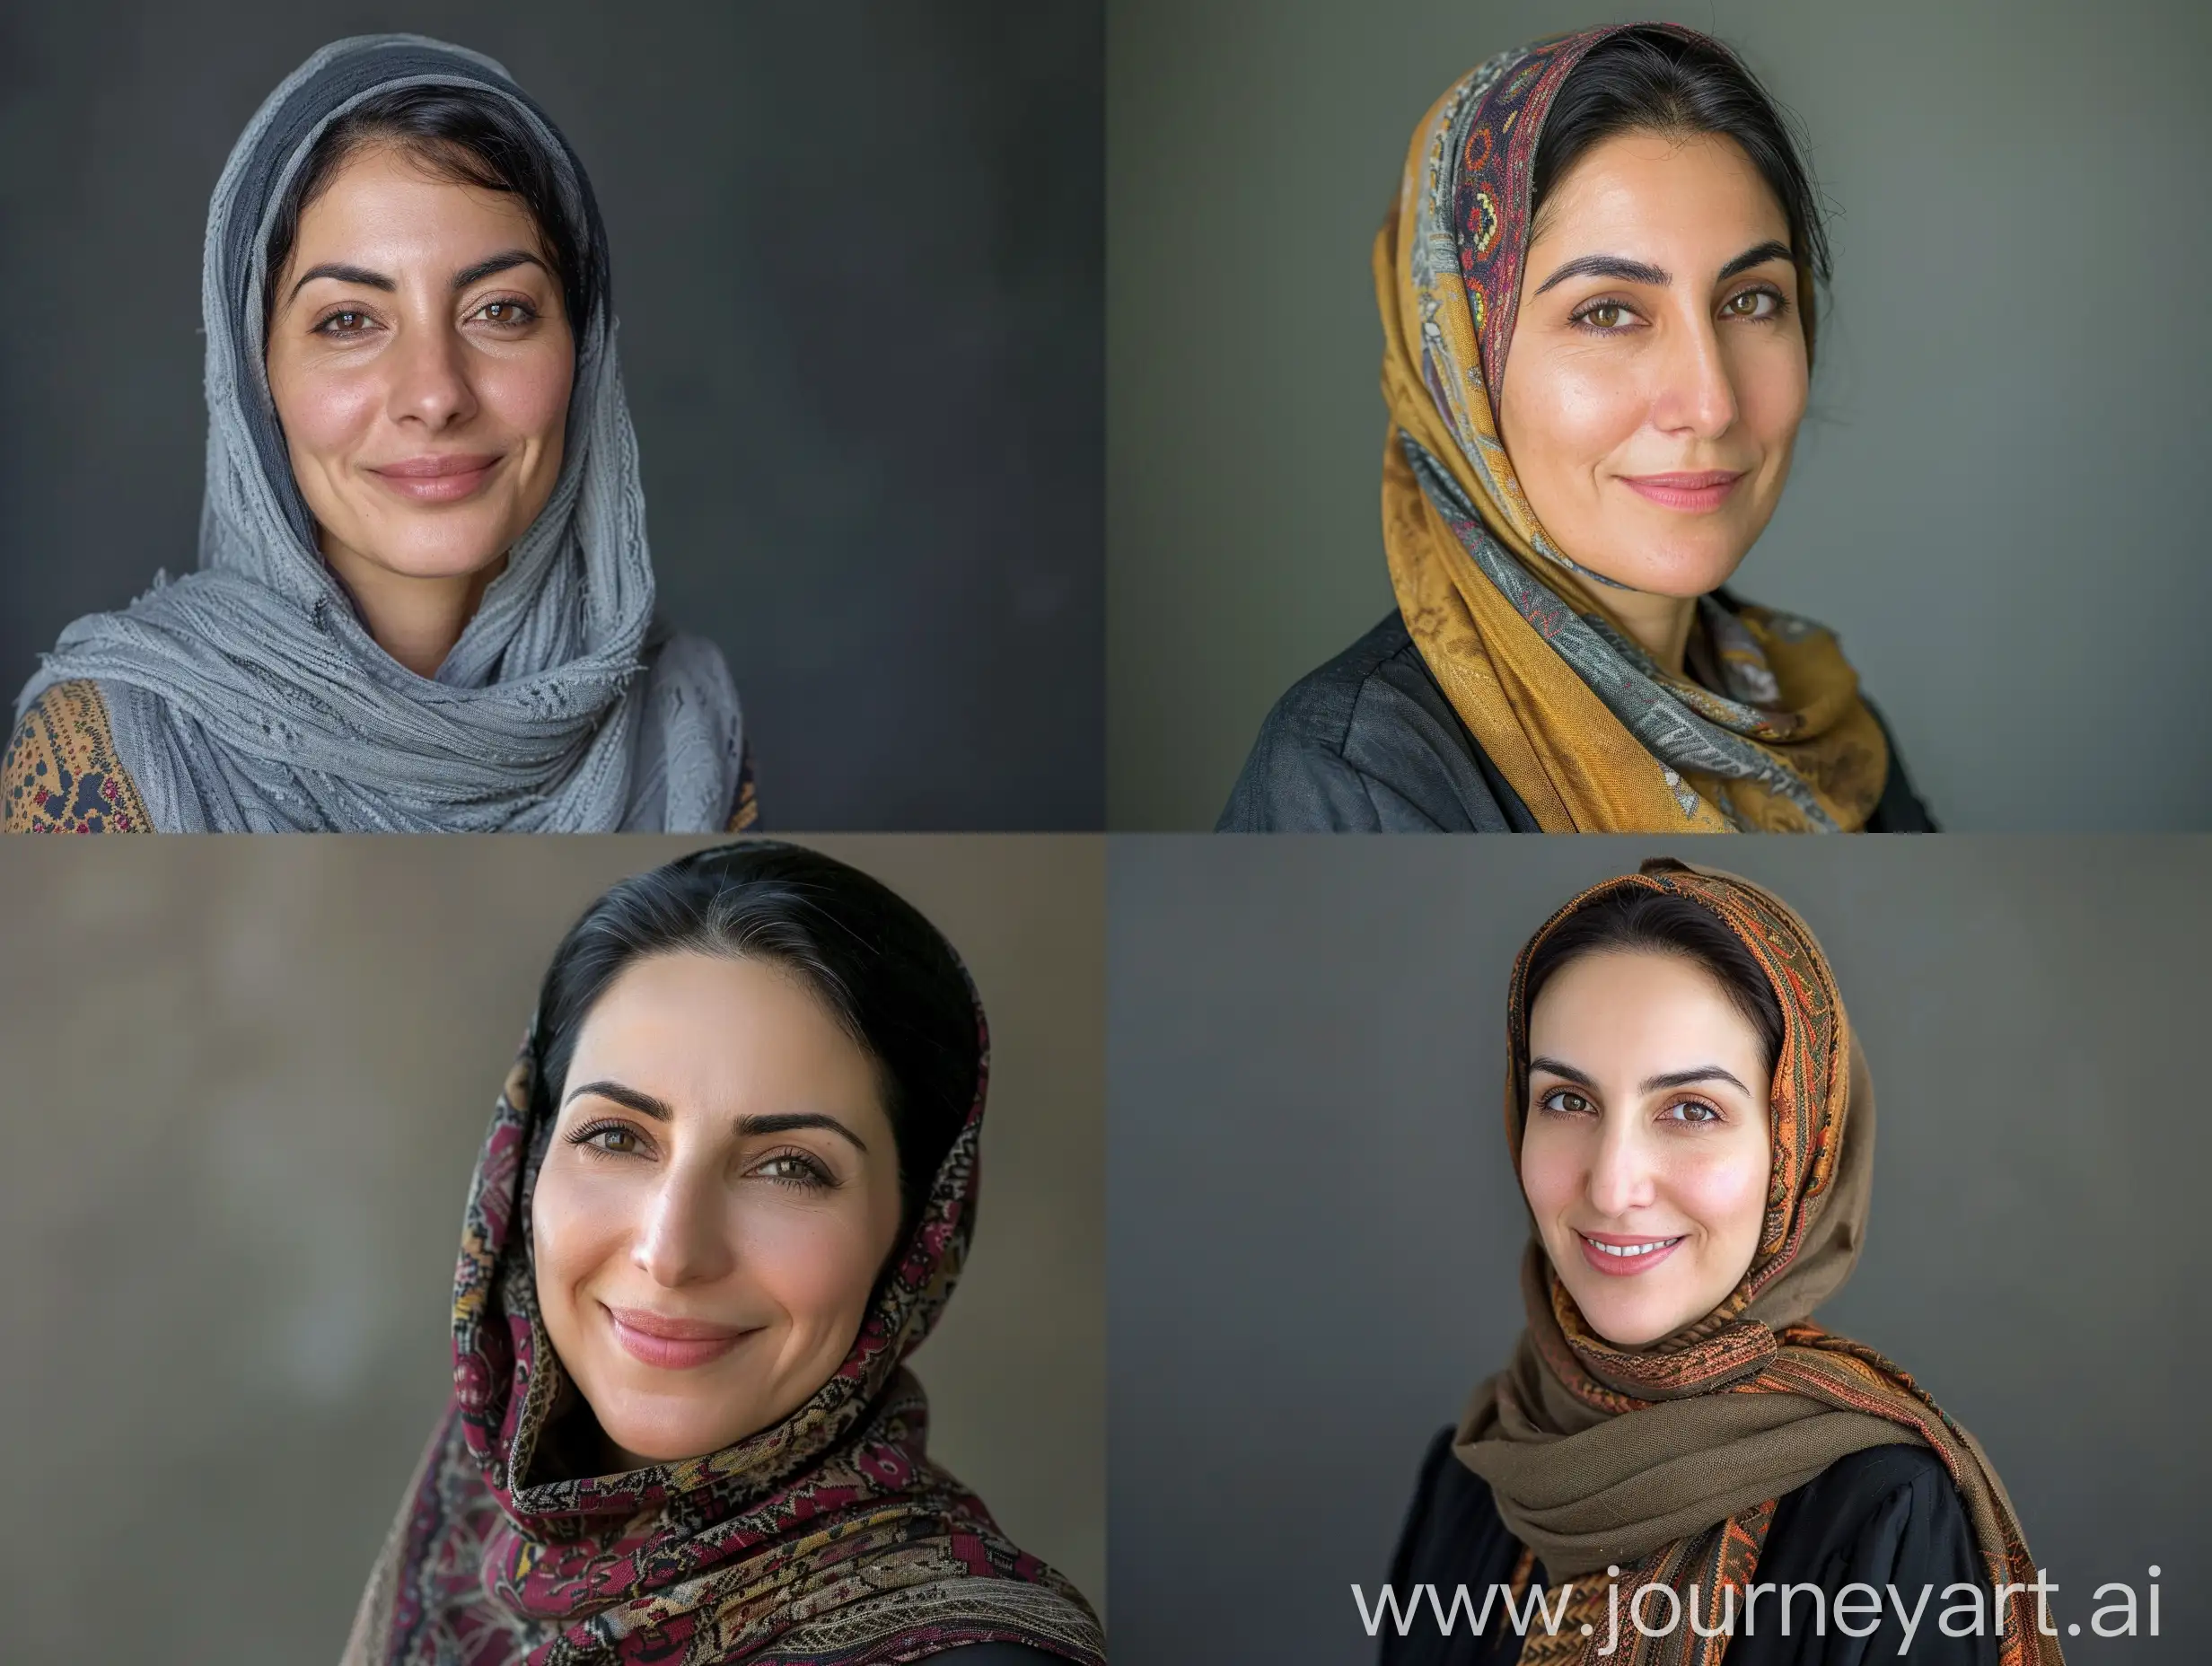 Real picture with natural light of Iranian woman. Smile at the camera and strength in the eyes.